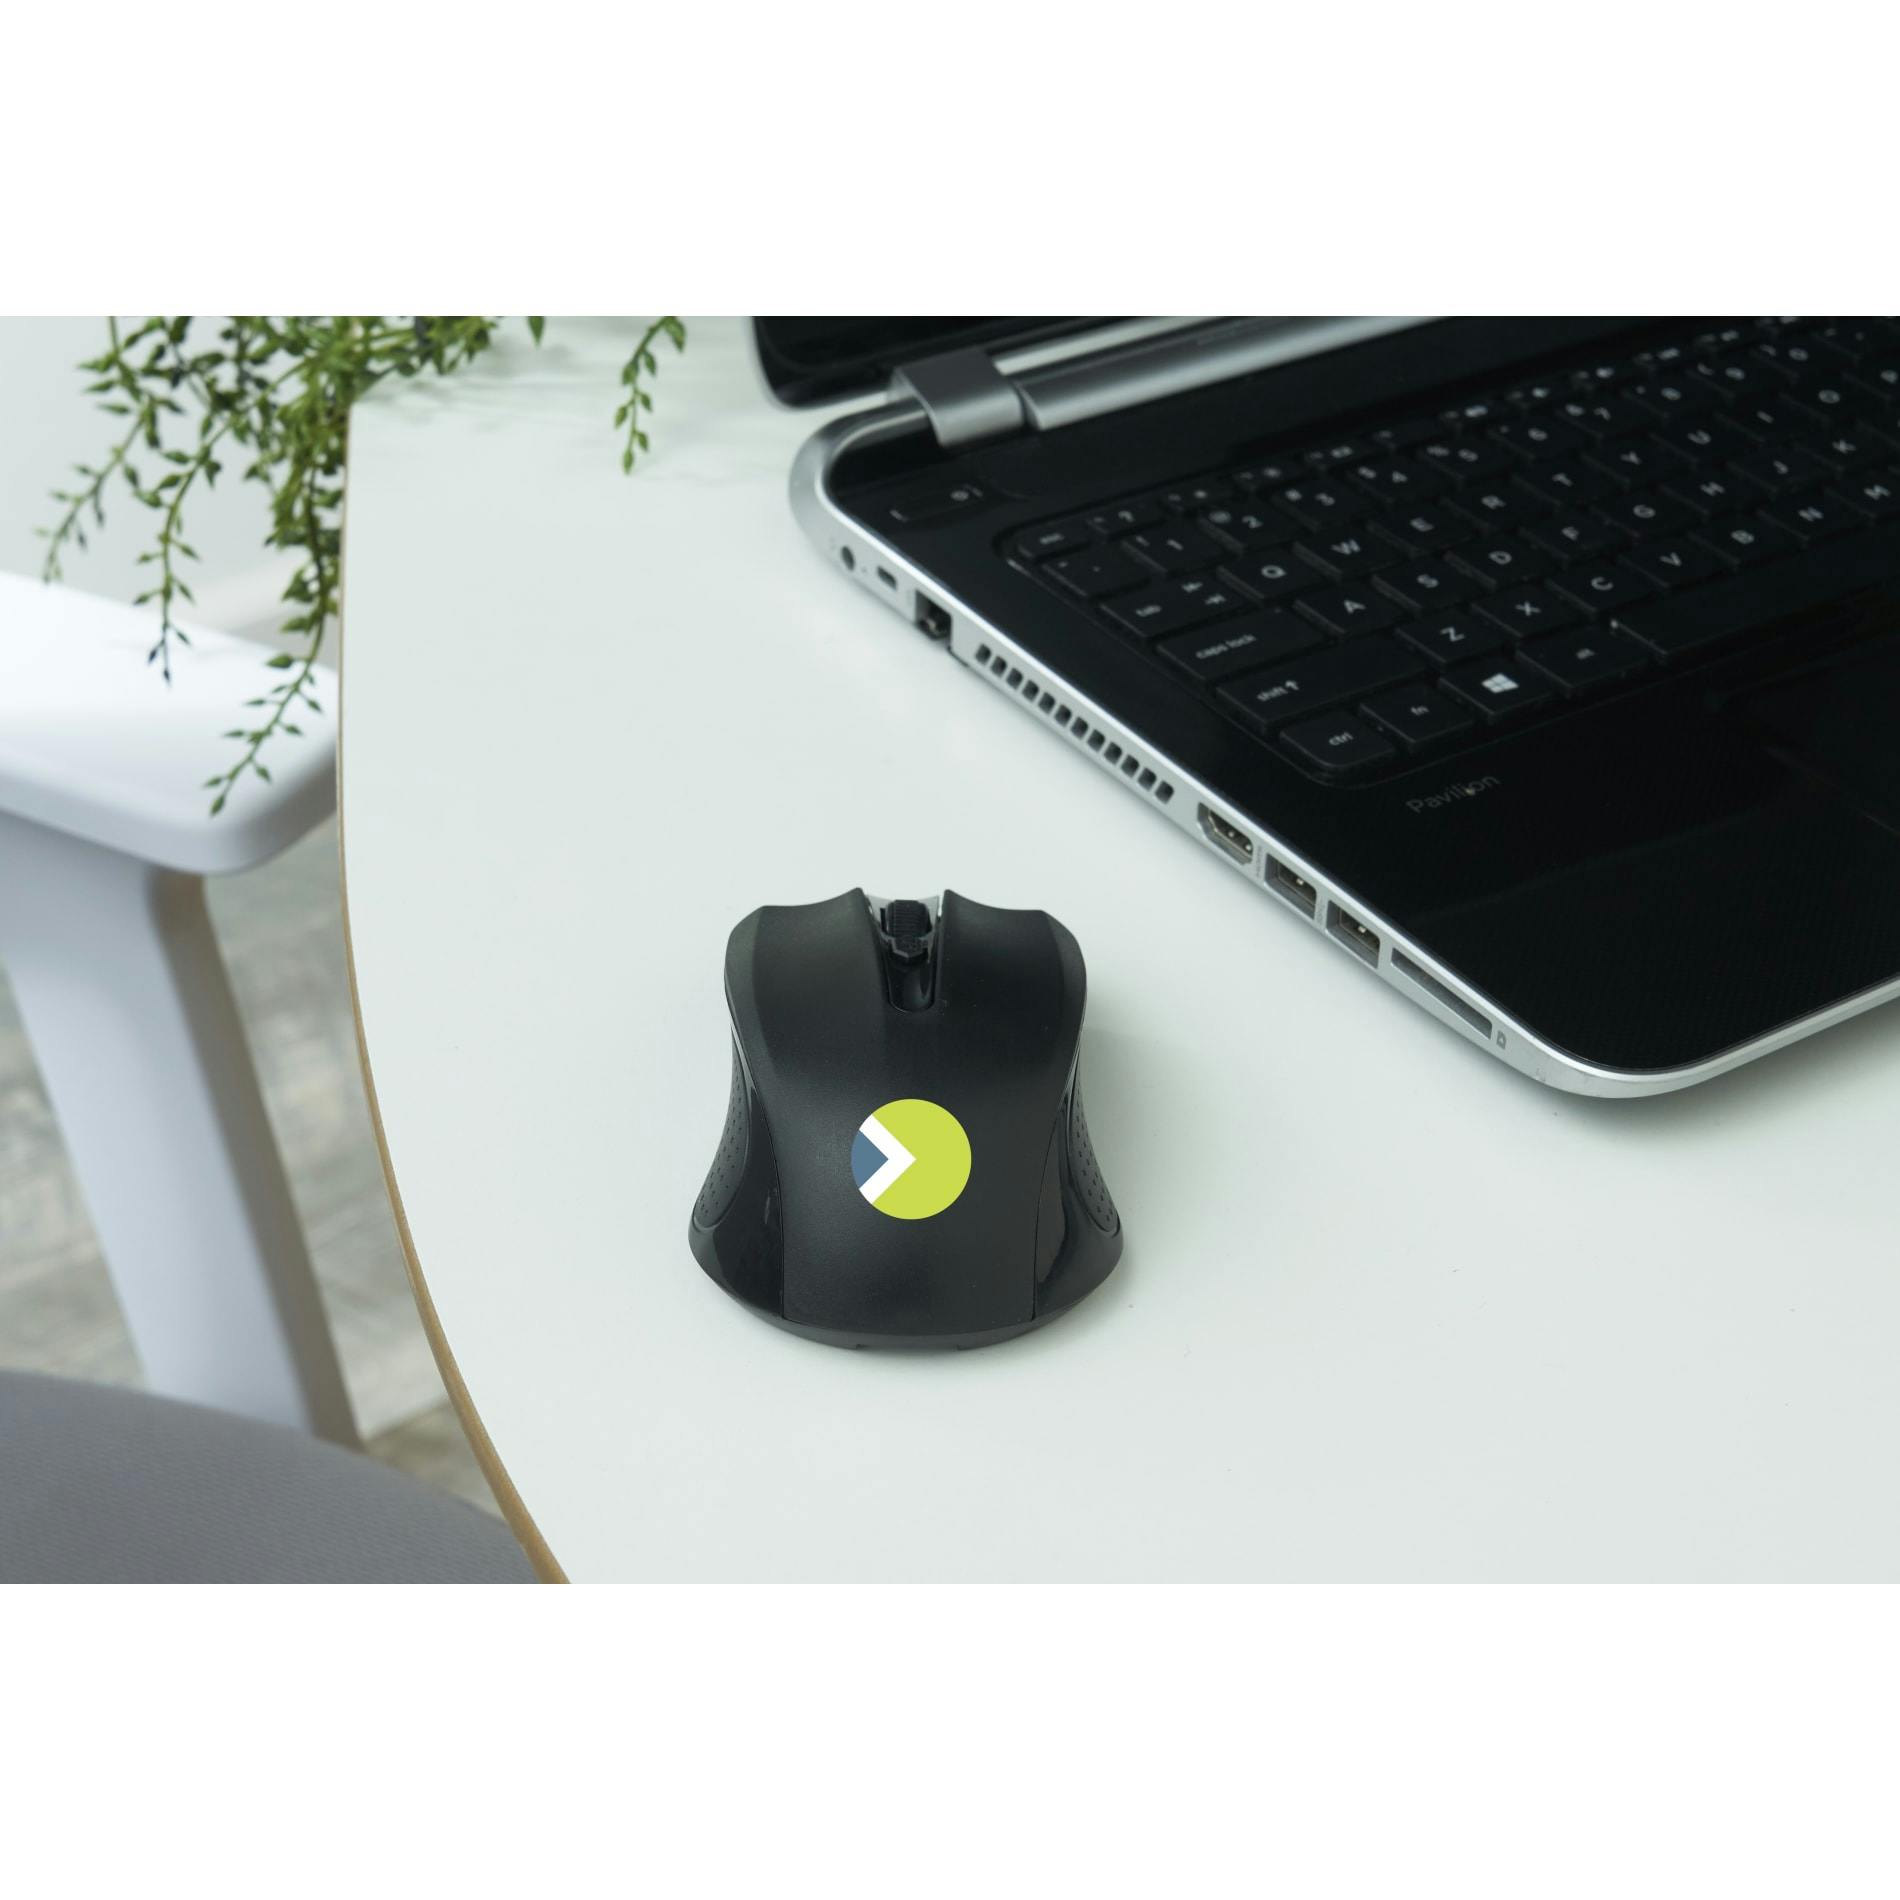 Galactic Wireless Mouse - additional Image 2